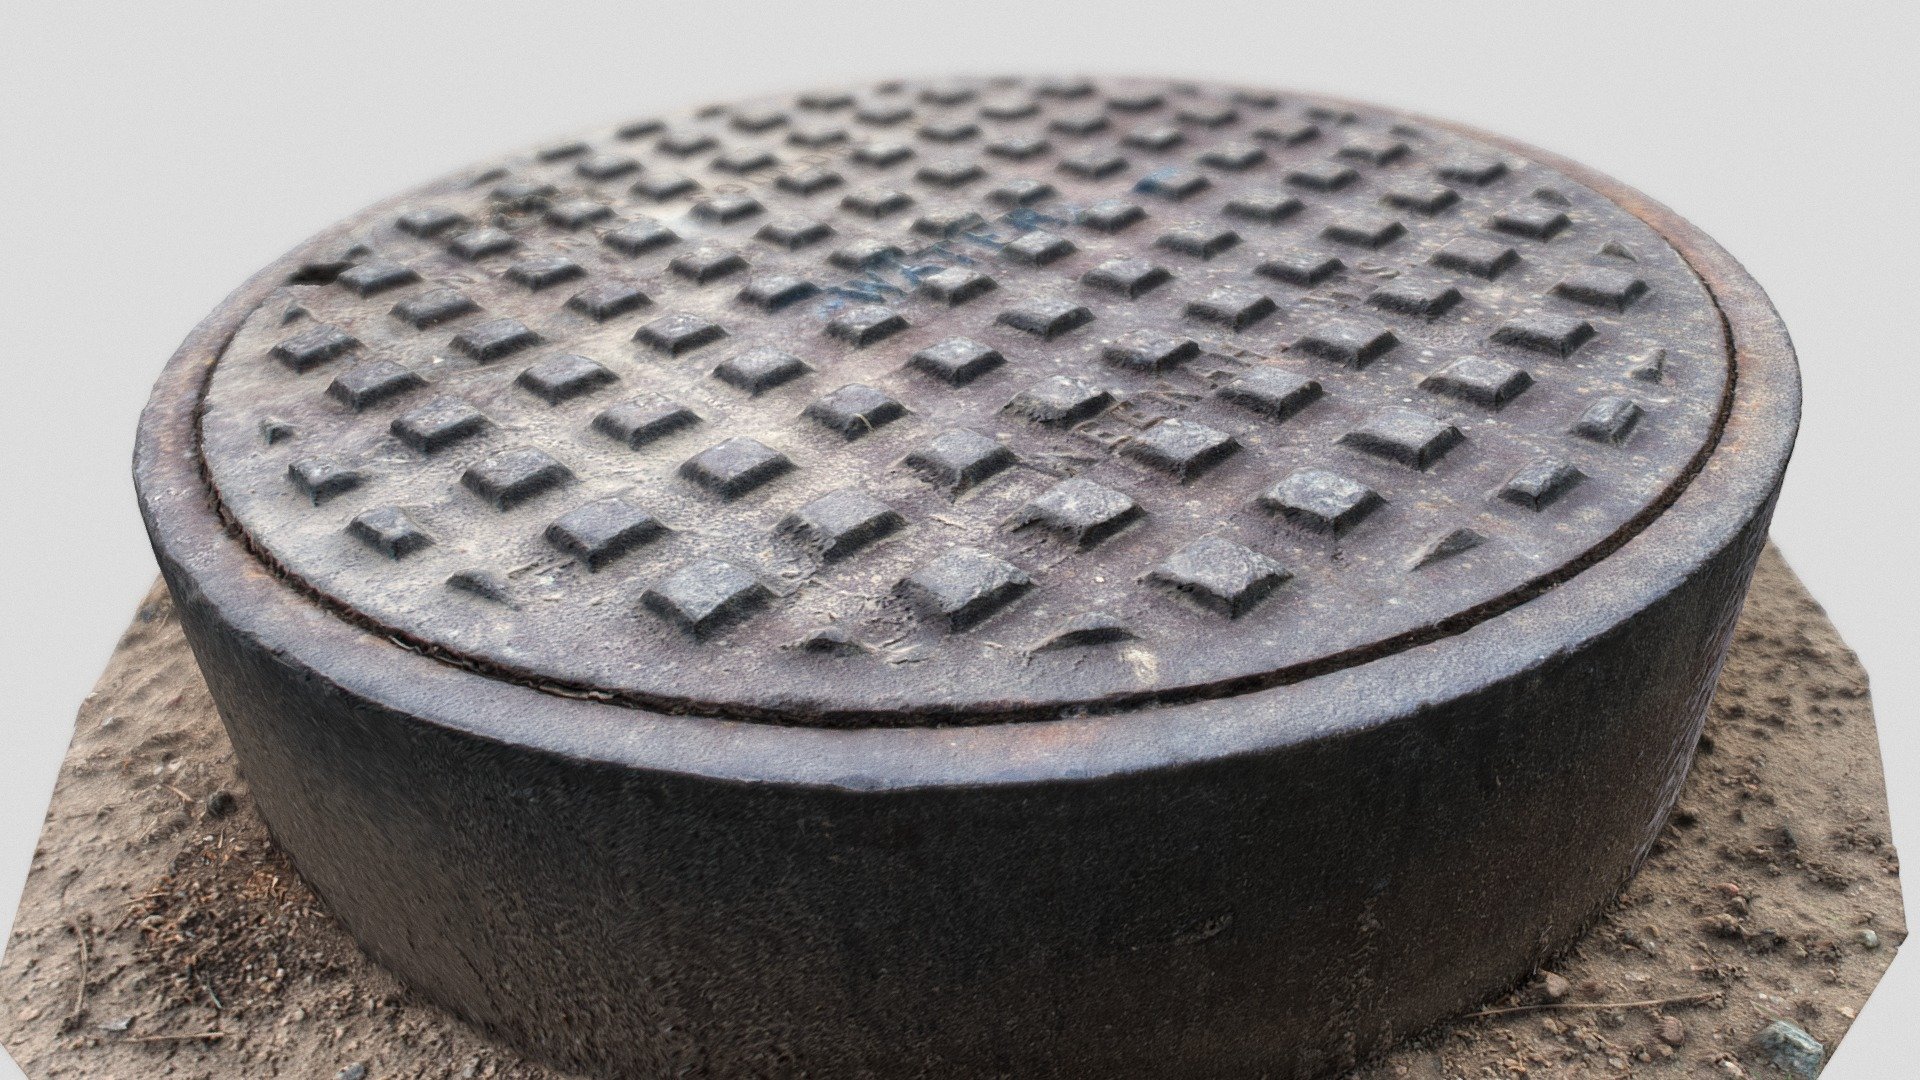 A dusty, weathered, and slightly rusted sewer manhole list. All sides except the bottom are modeled and textured. Model was produced as part of a high resolution photogrammetry session.

This is a highly detailed model ready to be placed in a highly detailed scene or set. This current model has not been optimized, and is pulished to have the max resolution size that will fit in an upload for SketchFab. Additional optimized variations will be provided soon after getting approval from Sketchfab.

Message me if you would like to commission any works 3d model